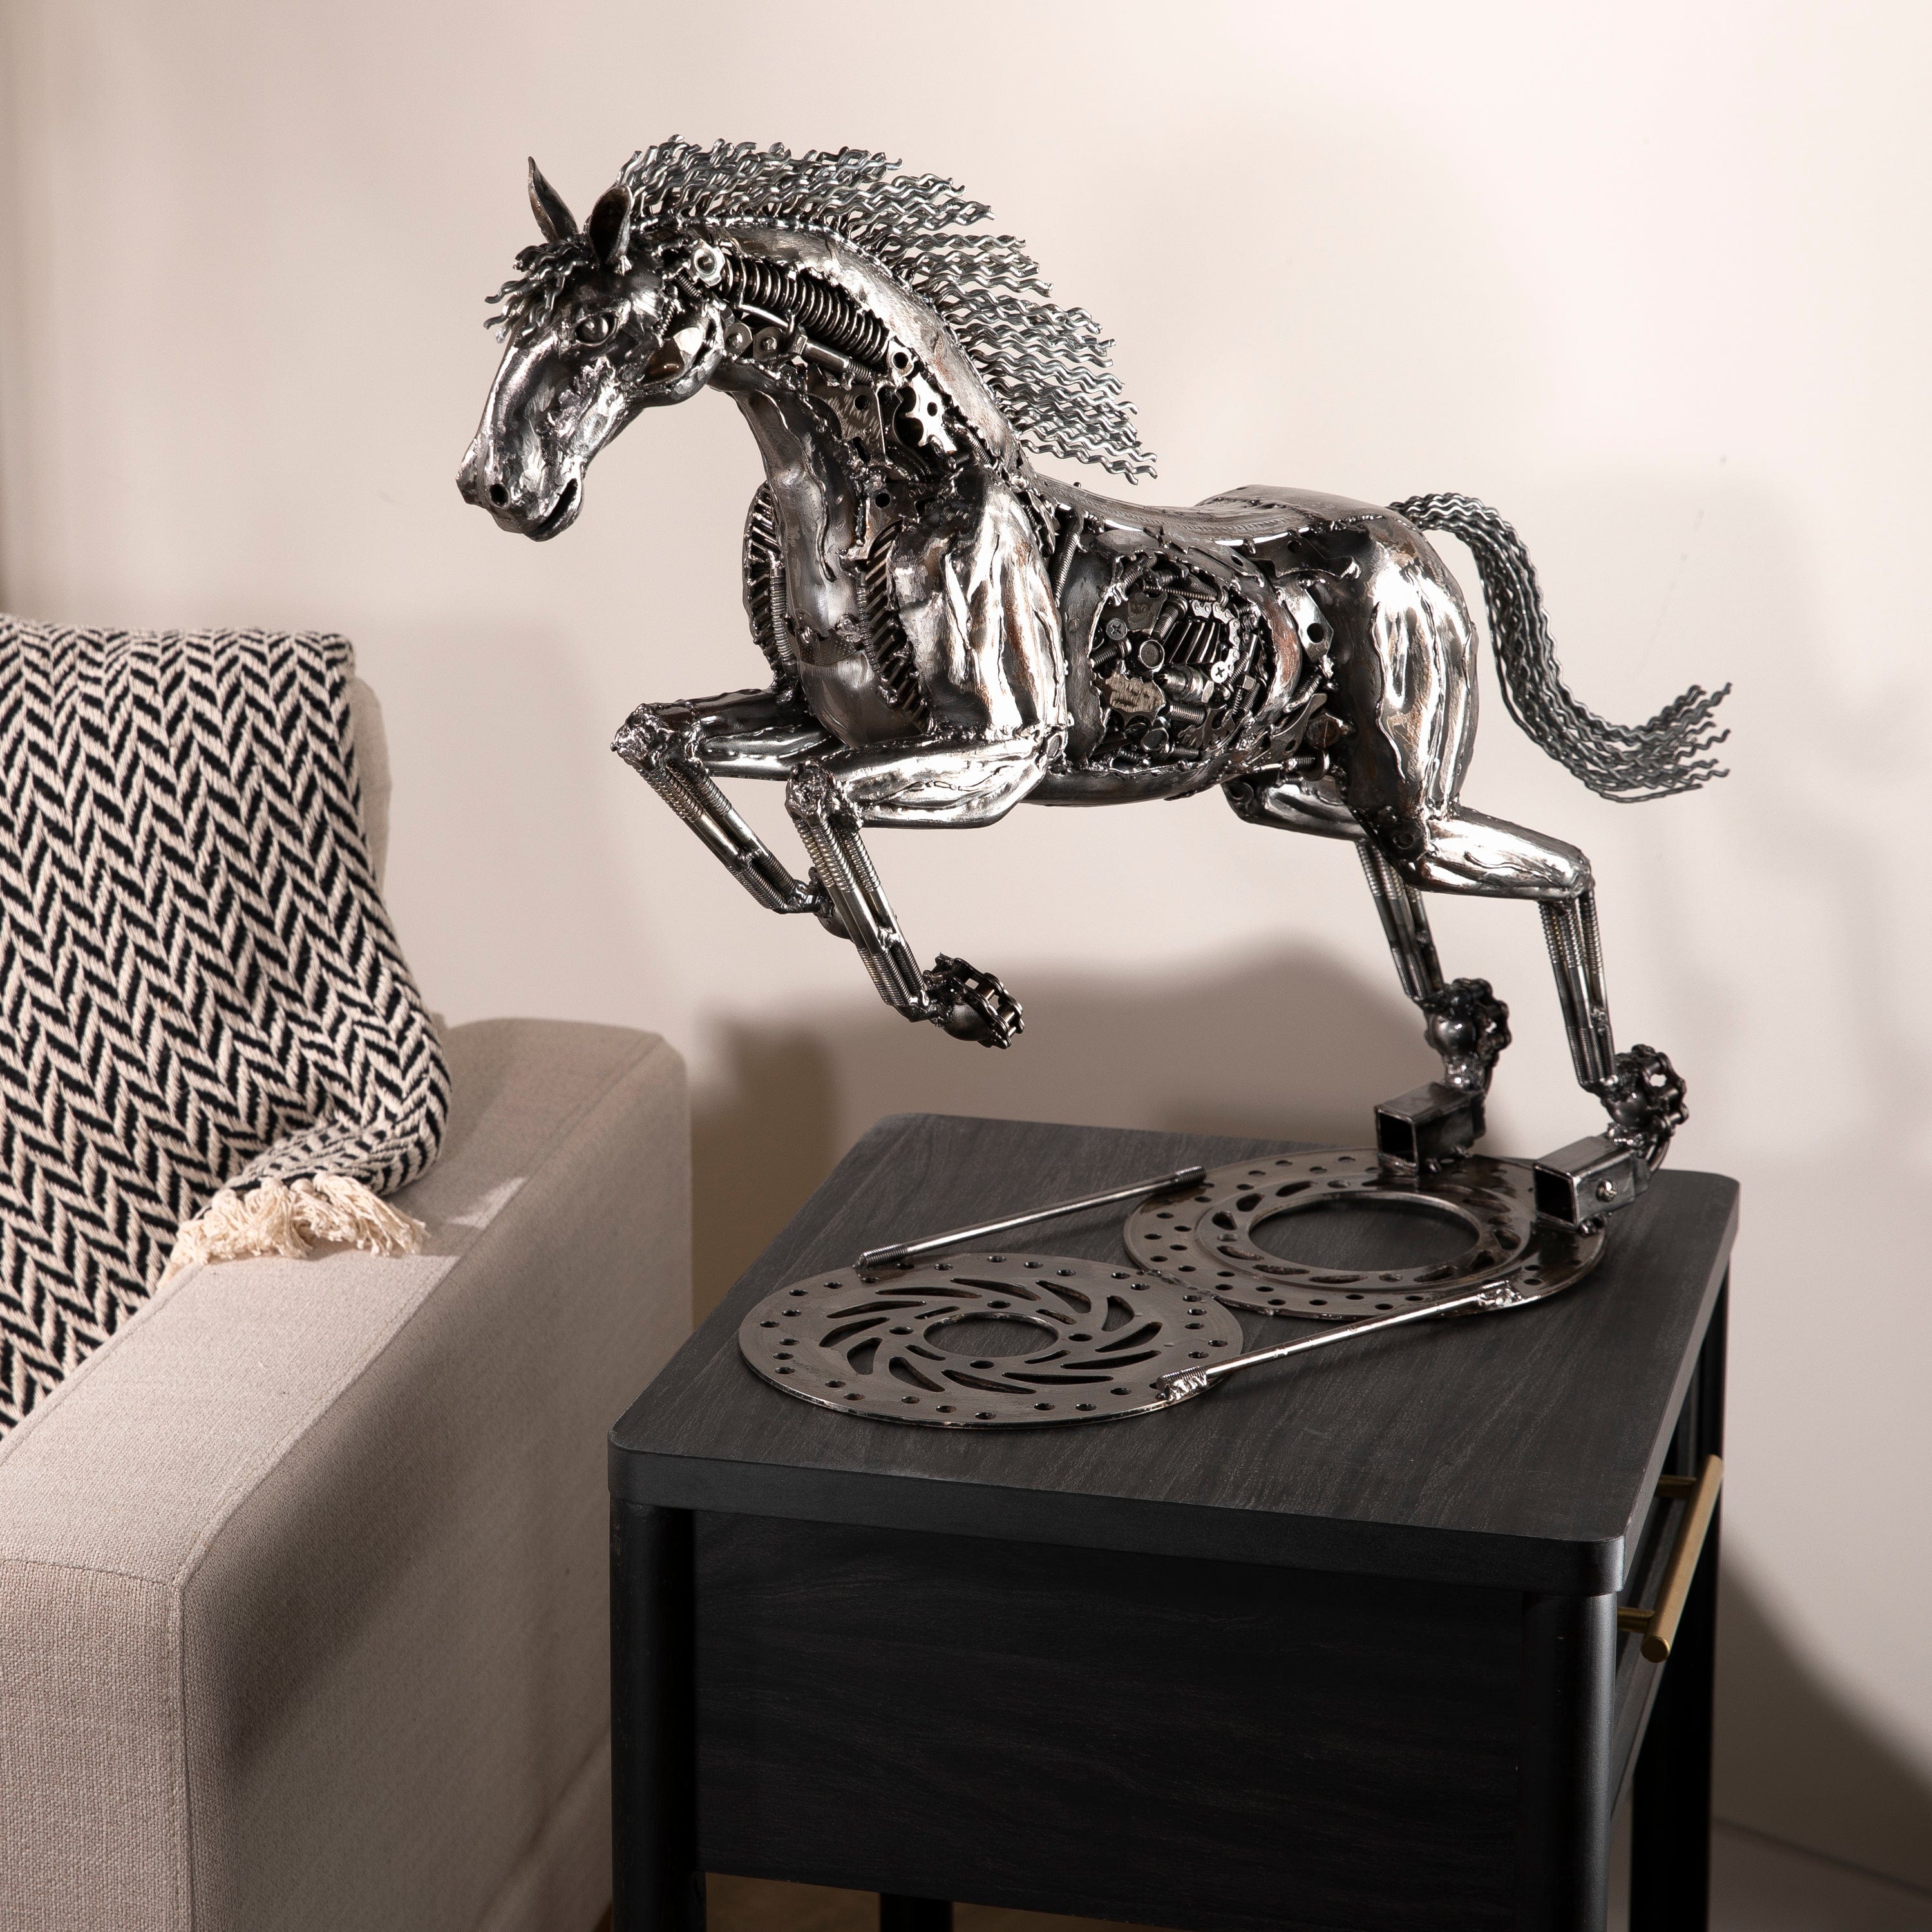 KALIFANO Recycled Metal Art 20" Horse Inspired Recycled Metal Art Sculpture RMS-HS69x63-PK